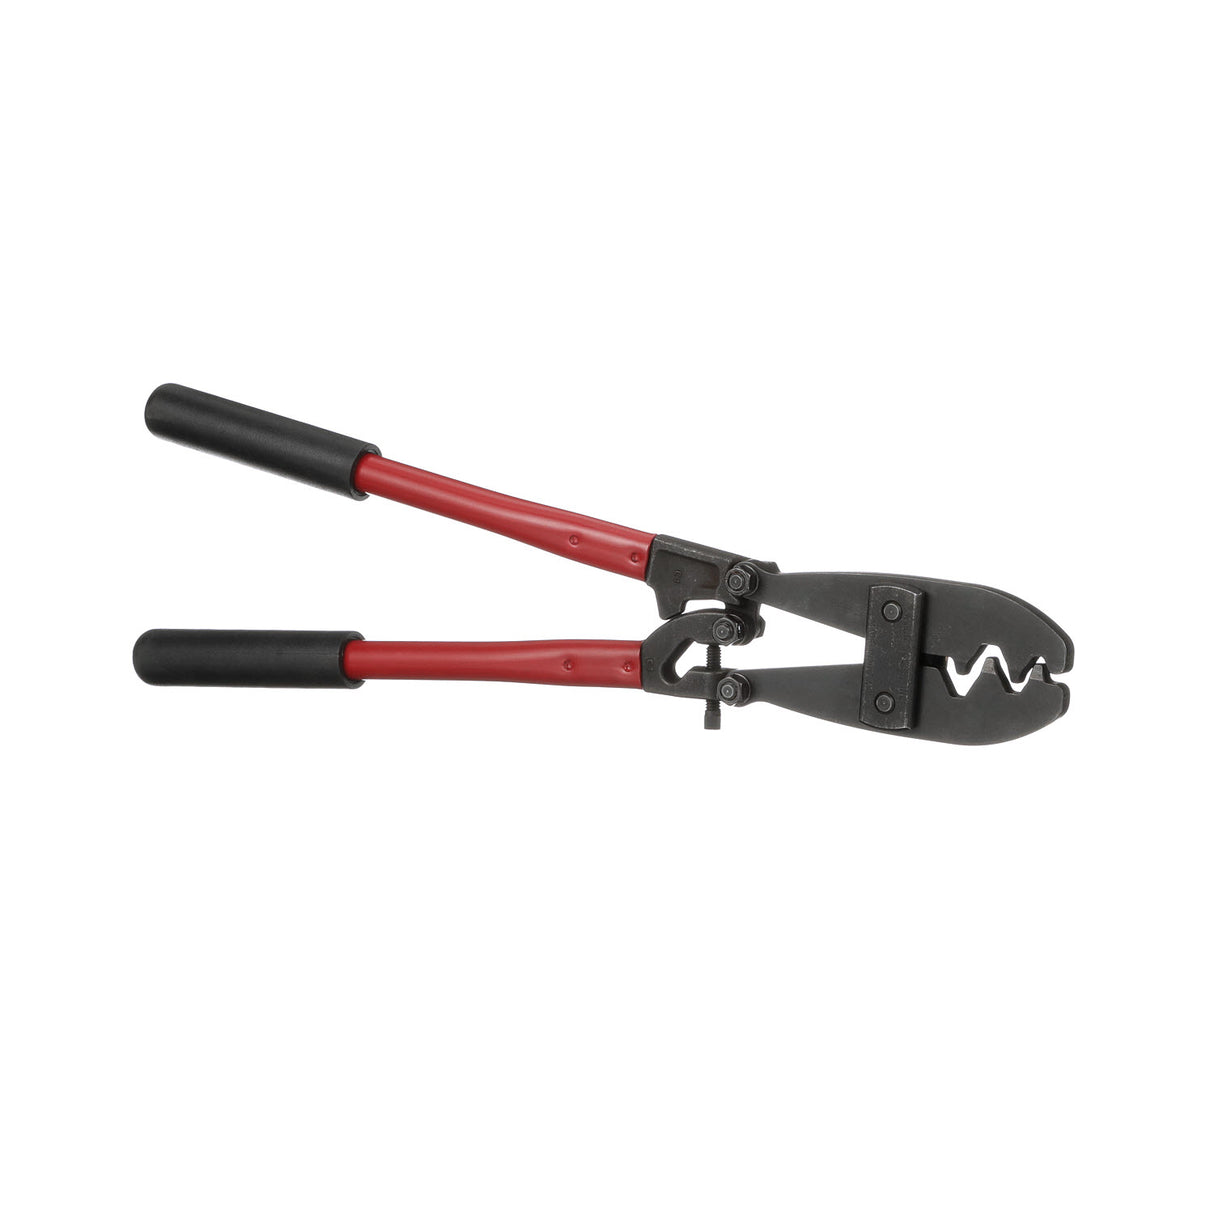 Klein Large Crimping Tool with Compound-Action